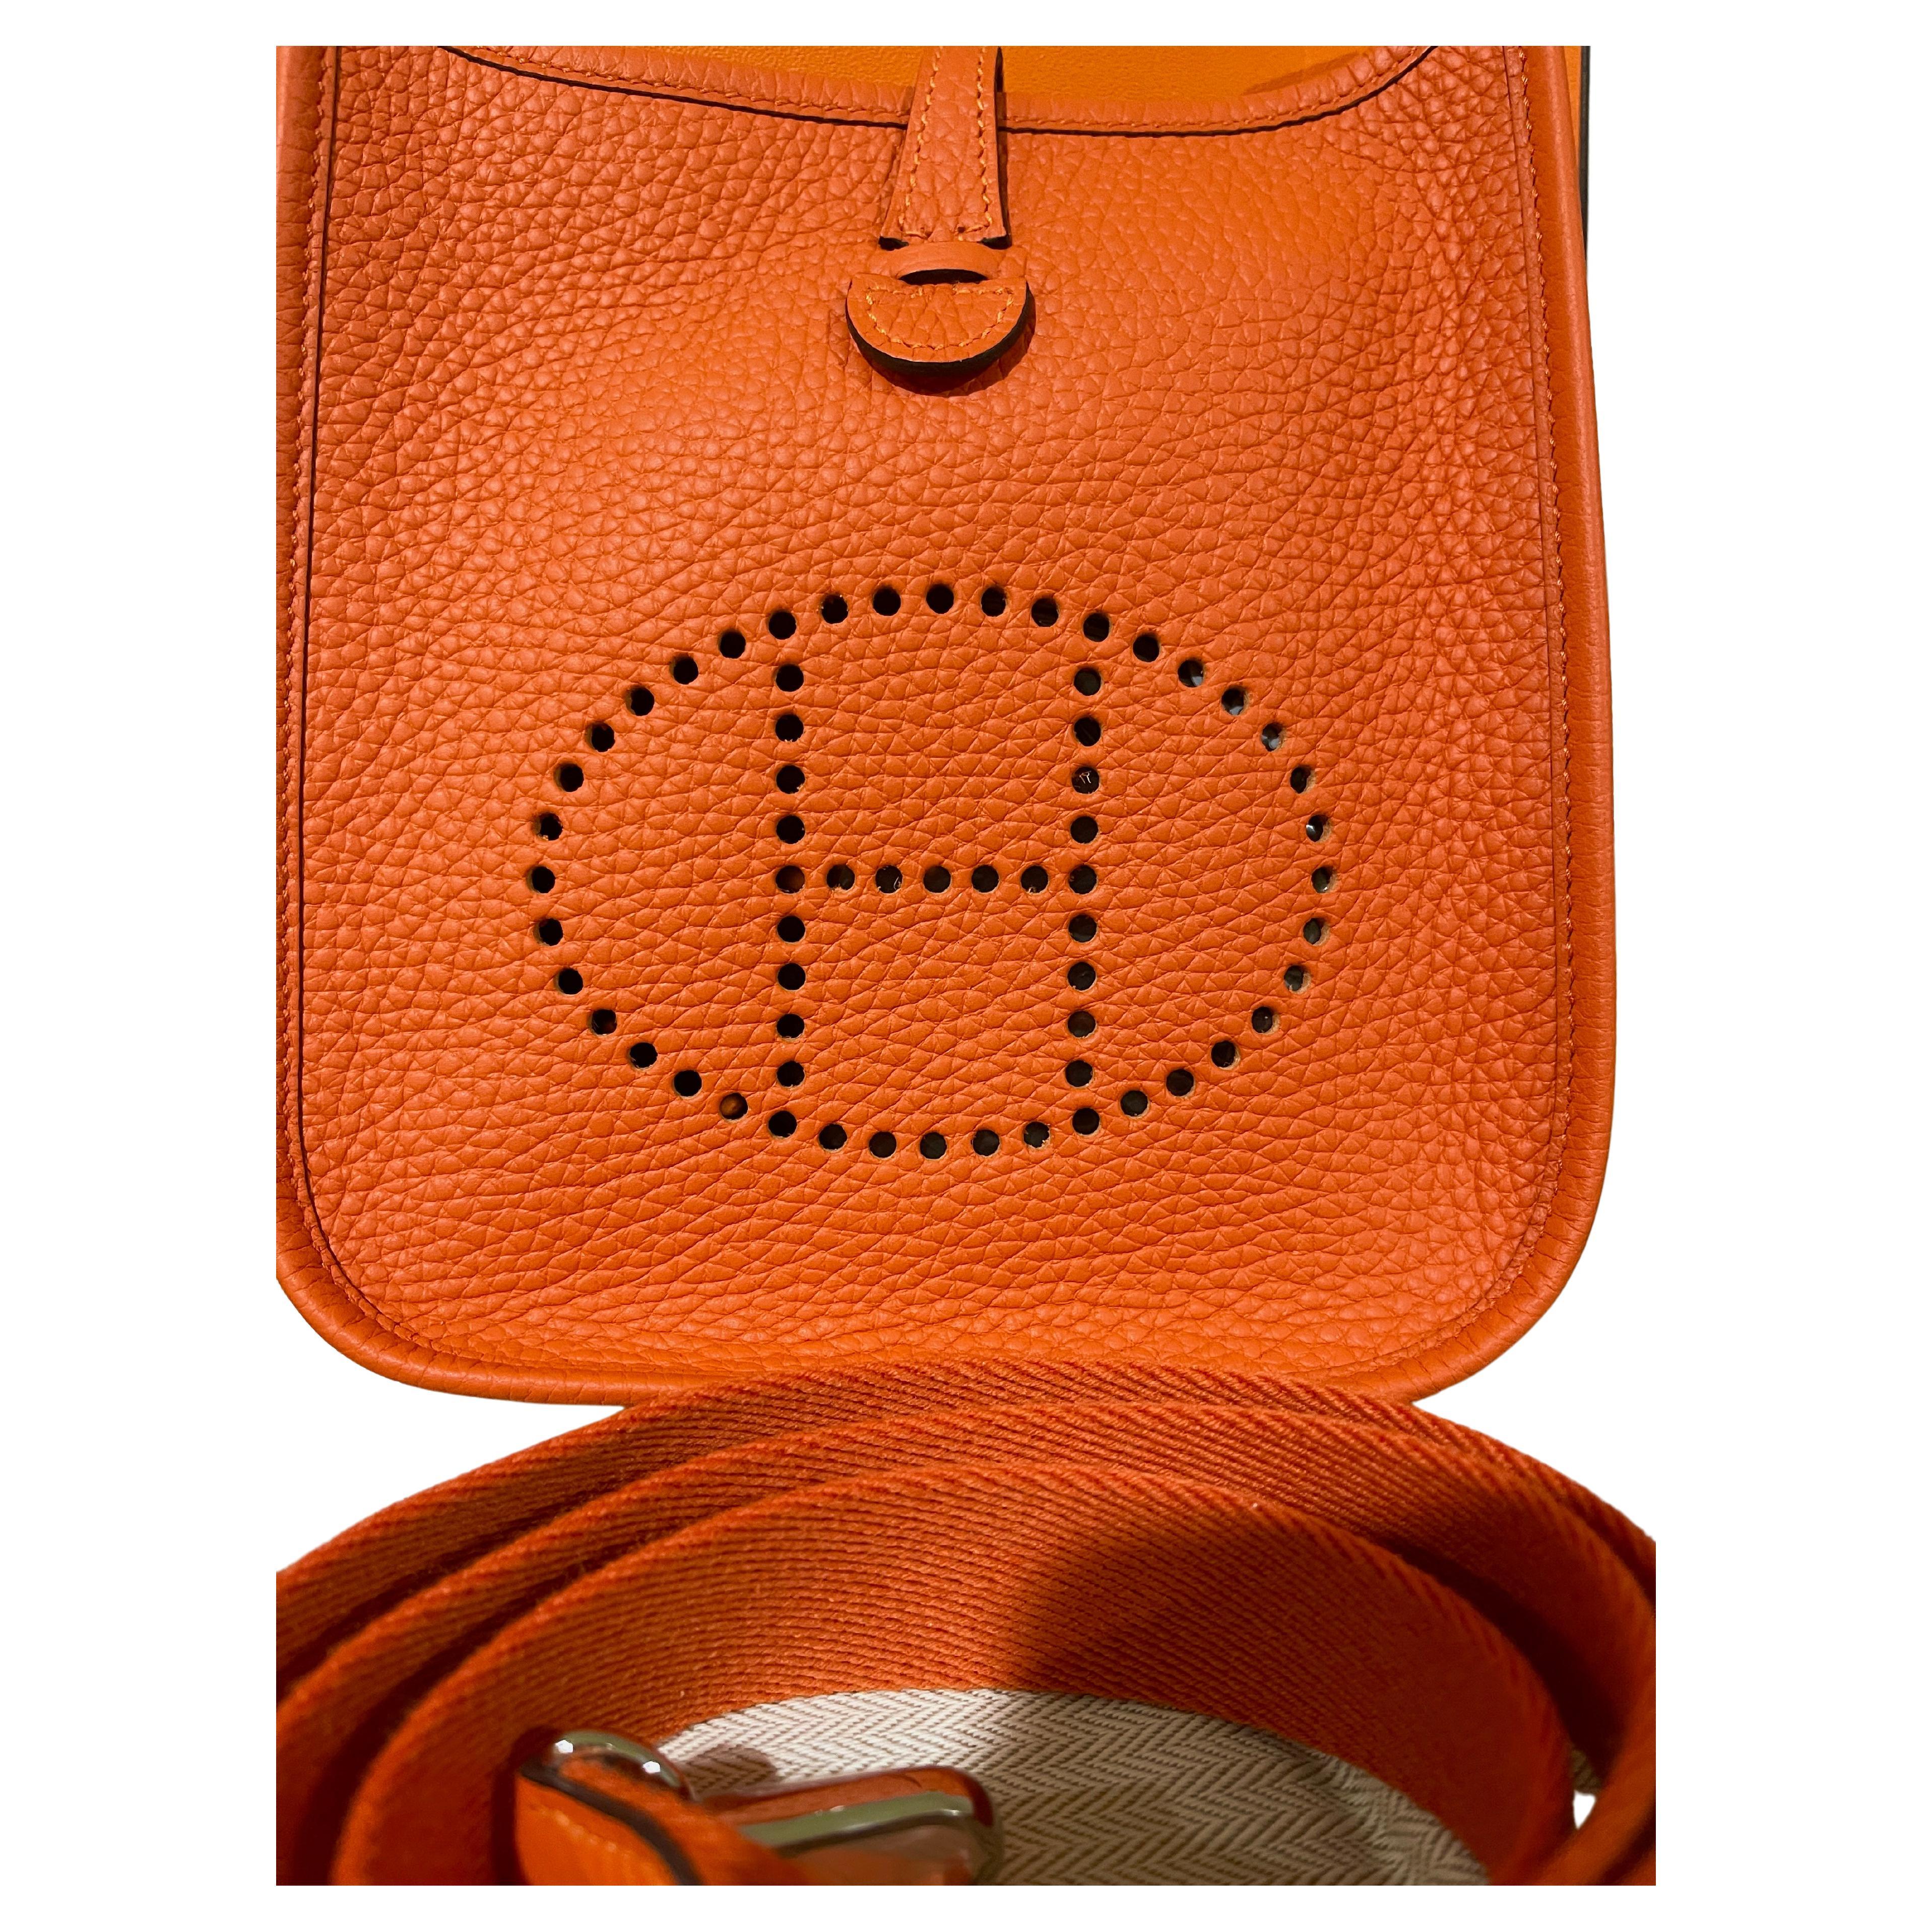 Hermes Evelyne Tpm 16

This is the mini, the smallest size they make

Orange with Palladium

Taurillon Clemence Leather

Natural  interior




New storefresh, never worn



Measurements: 6.75